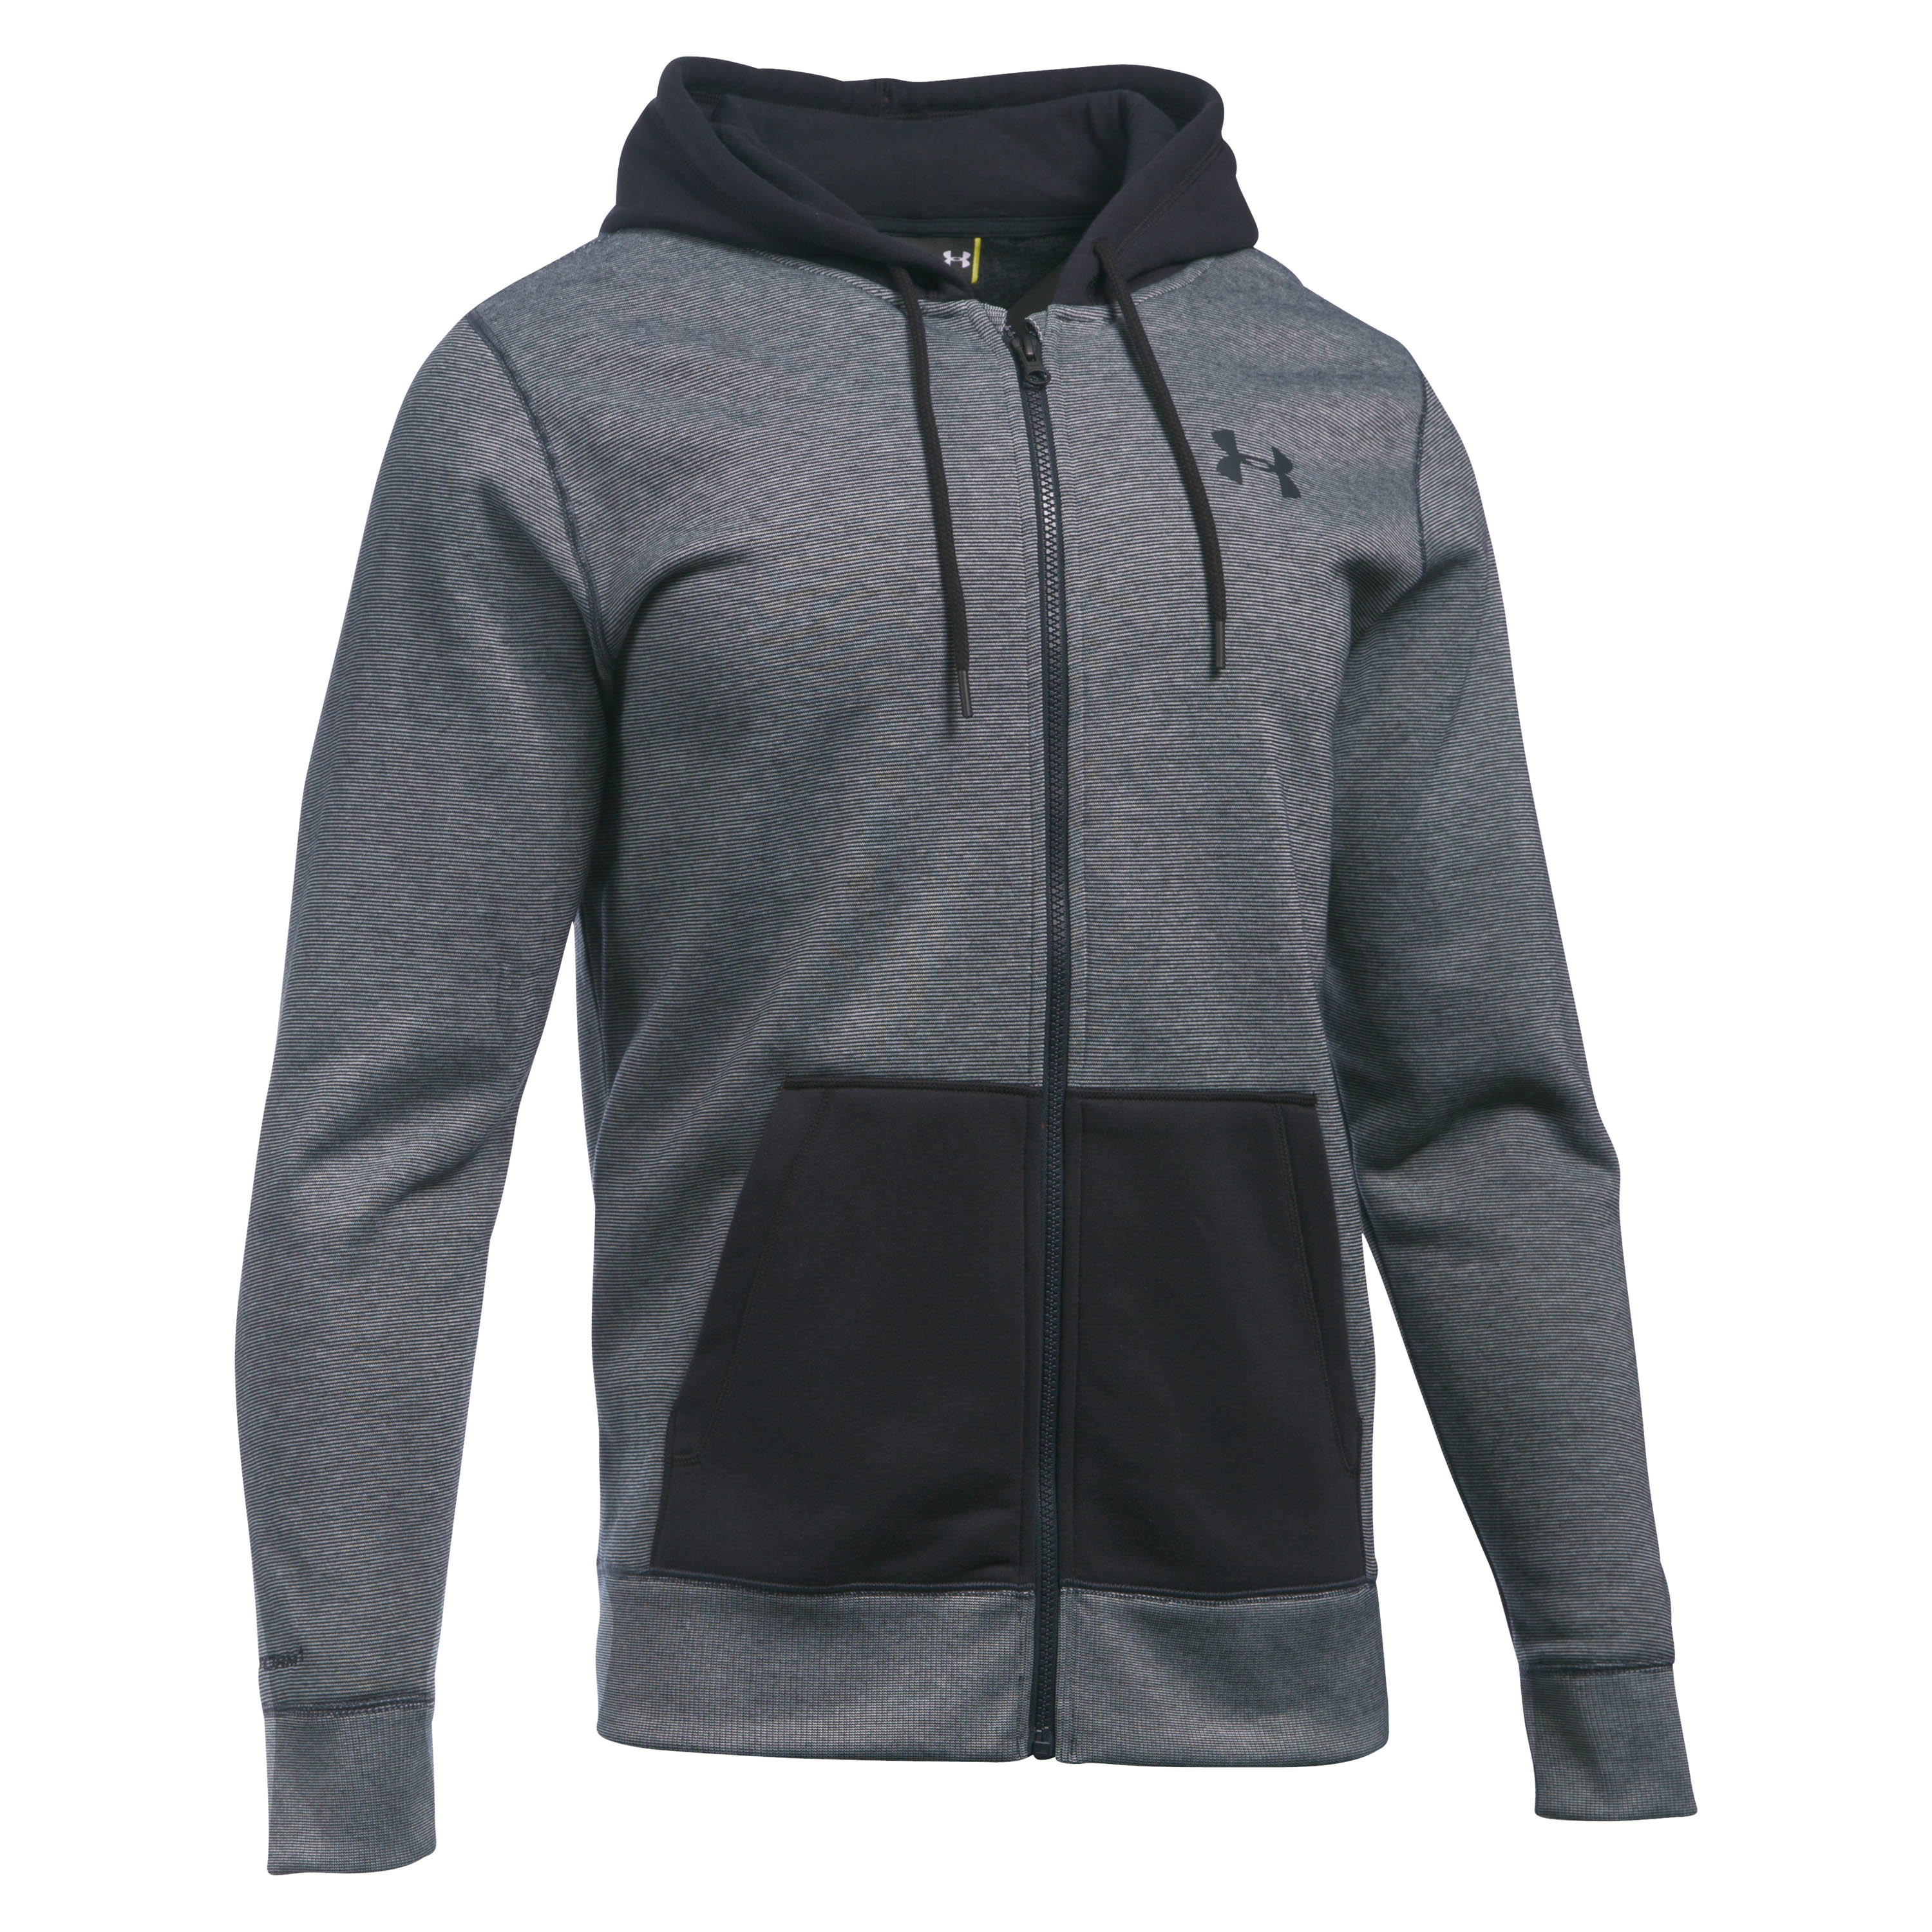 Under Armour Hoody Storm Rival black